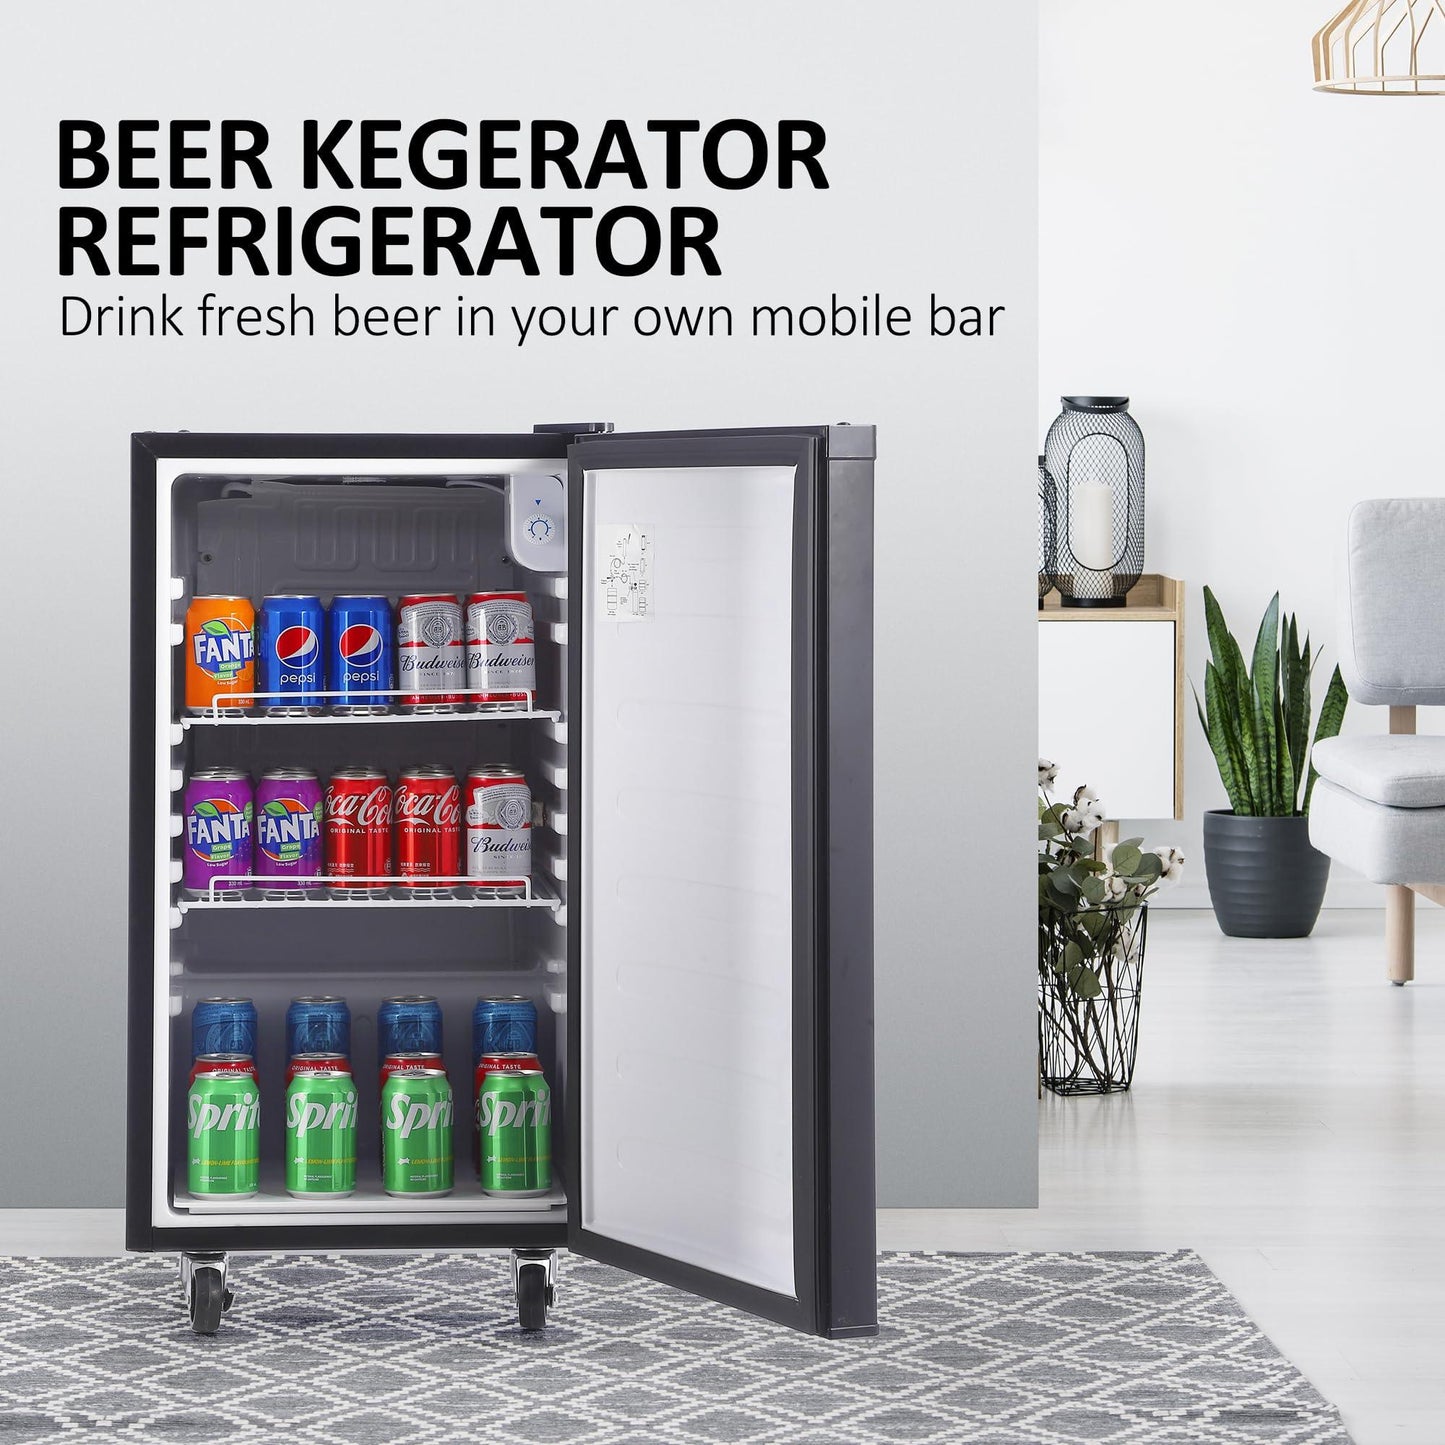 Kegerator and Keg Beer Cooler, Single Faucet Draft Beer Dispenser, Full Size Keg Refrigerator With Shelves, Stainless Steel, Drip Tray & Rail,black - CookCave